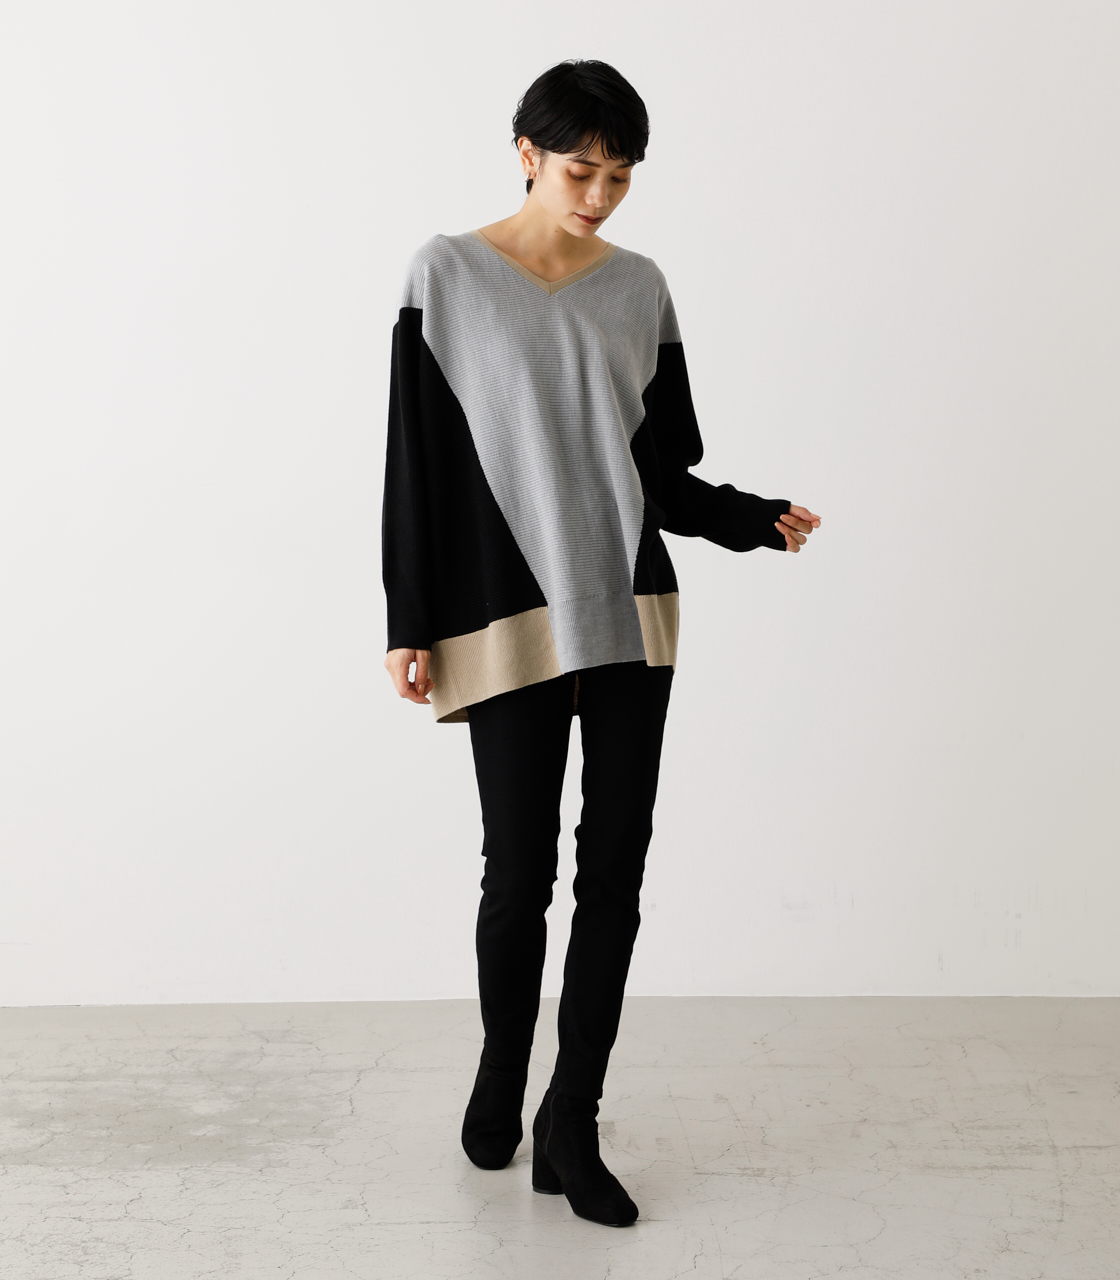 NUDIE DOLMAN KNIT TOPS/ヌーディードルマンニットトップス 詳細画像 柄GRY 4